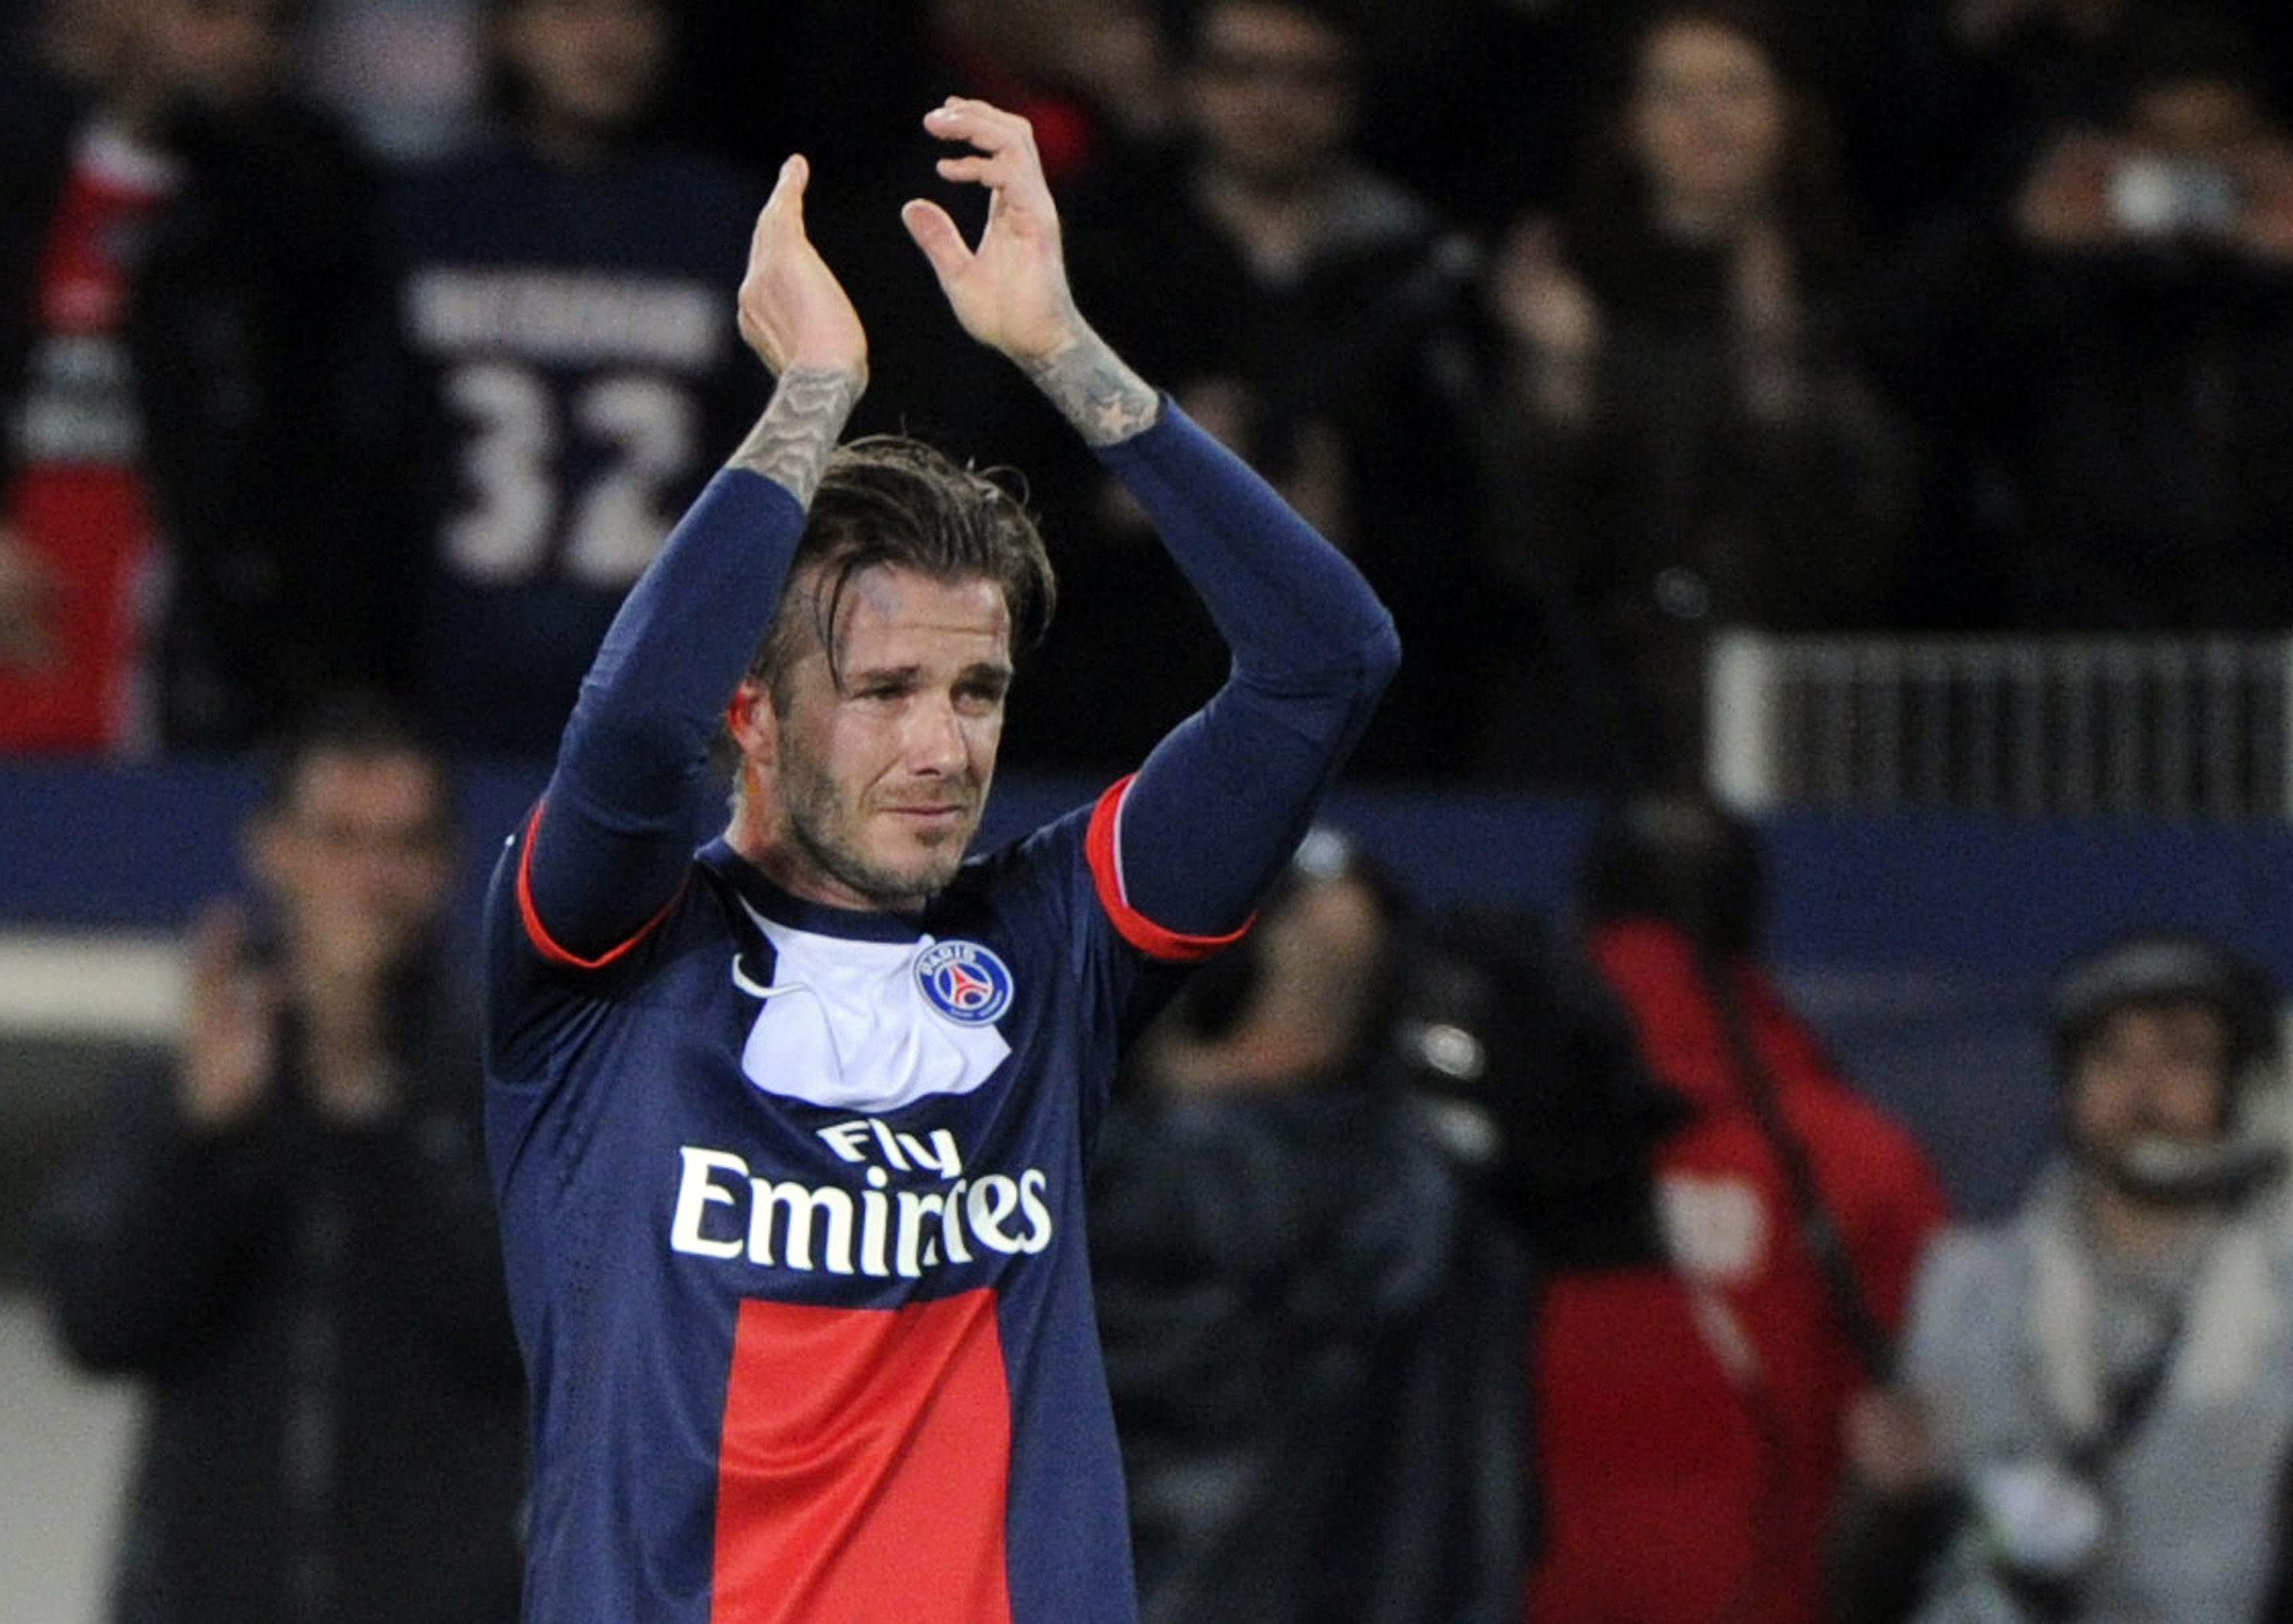 David Beckham cries after being substituted during a French L1 football match between Paris St Germain and Brest at Parc des Princes stadium in Paris on May 18, 2013. | Source: Getty Images